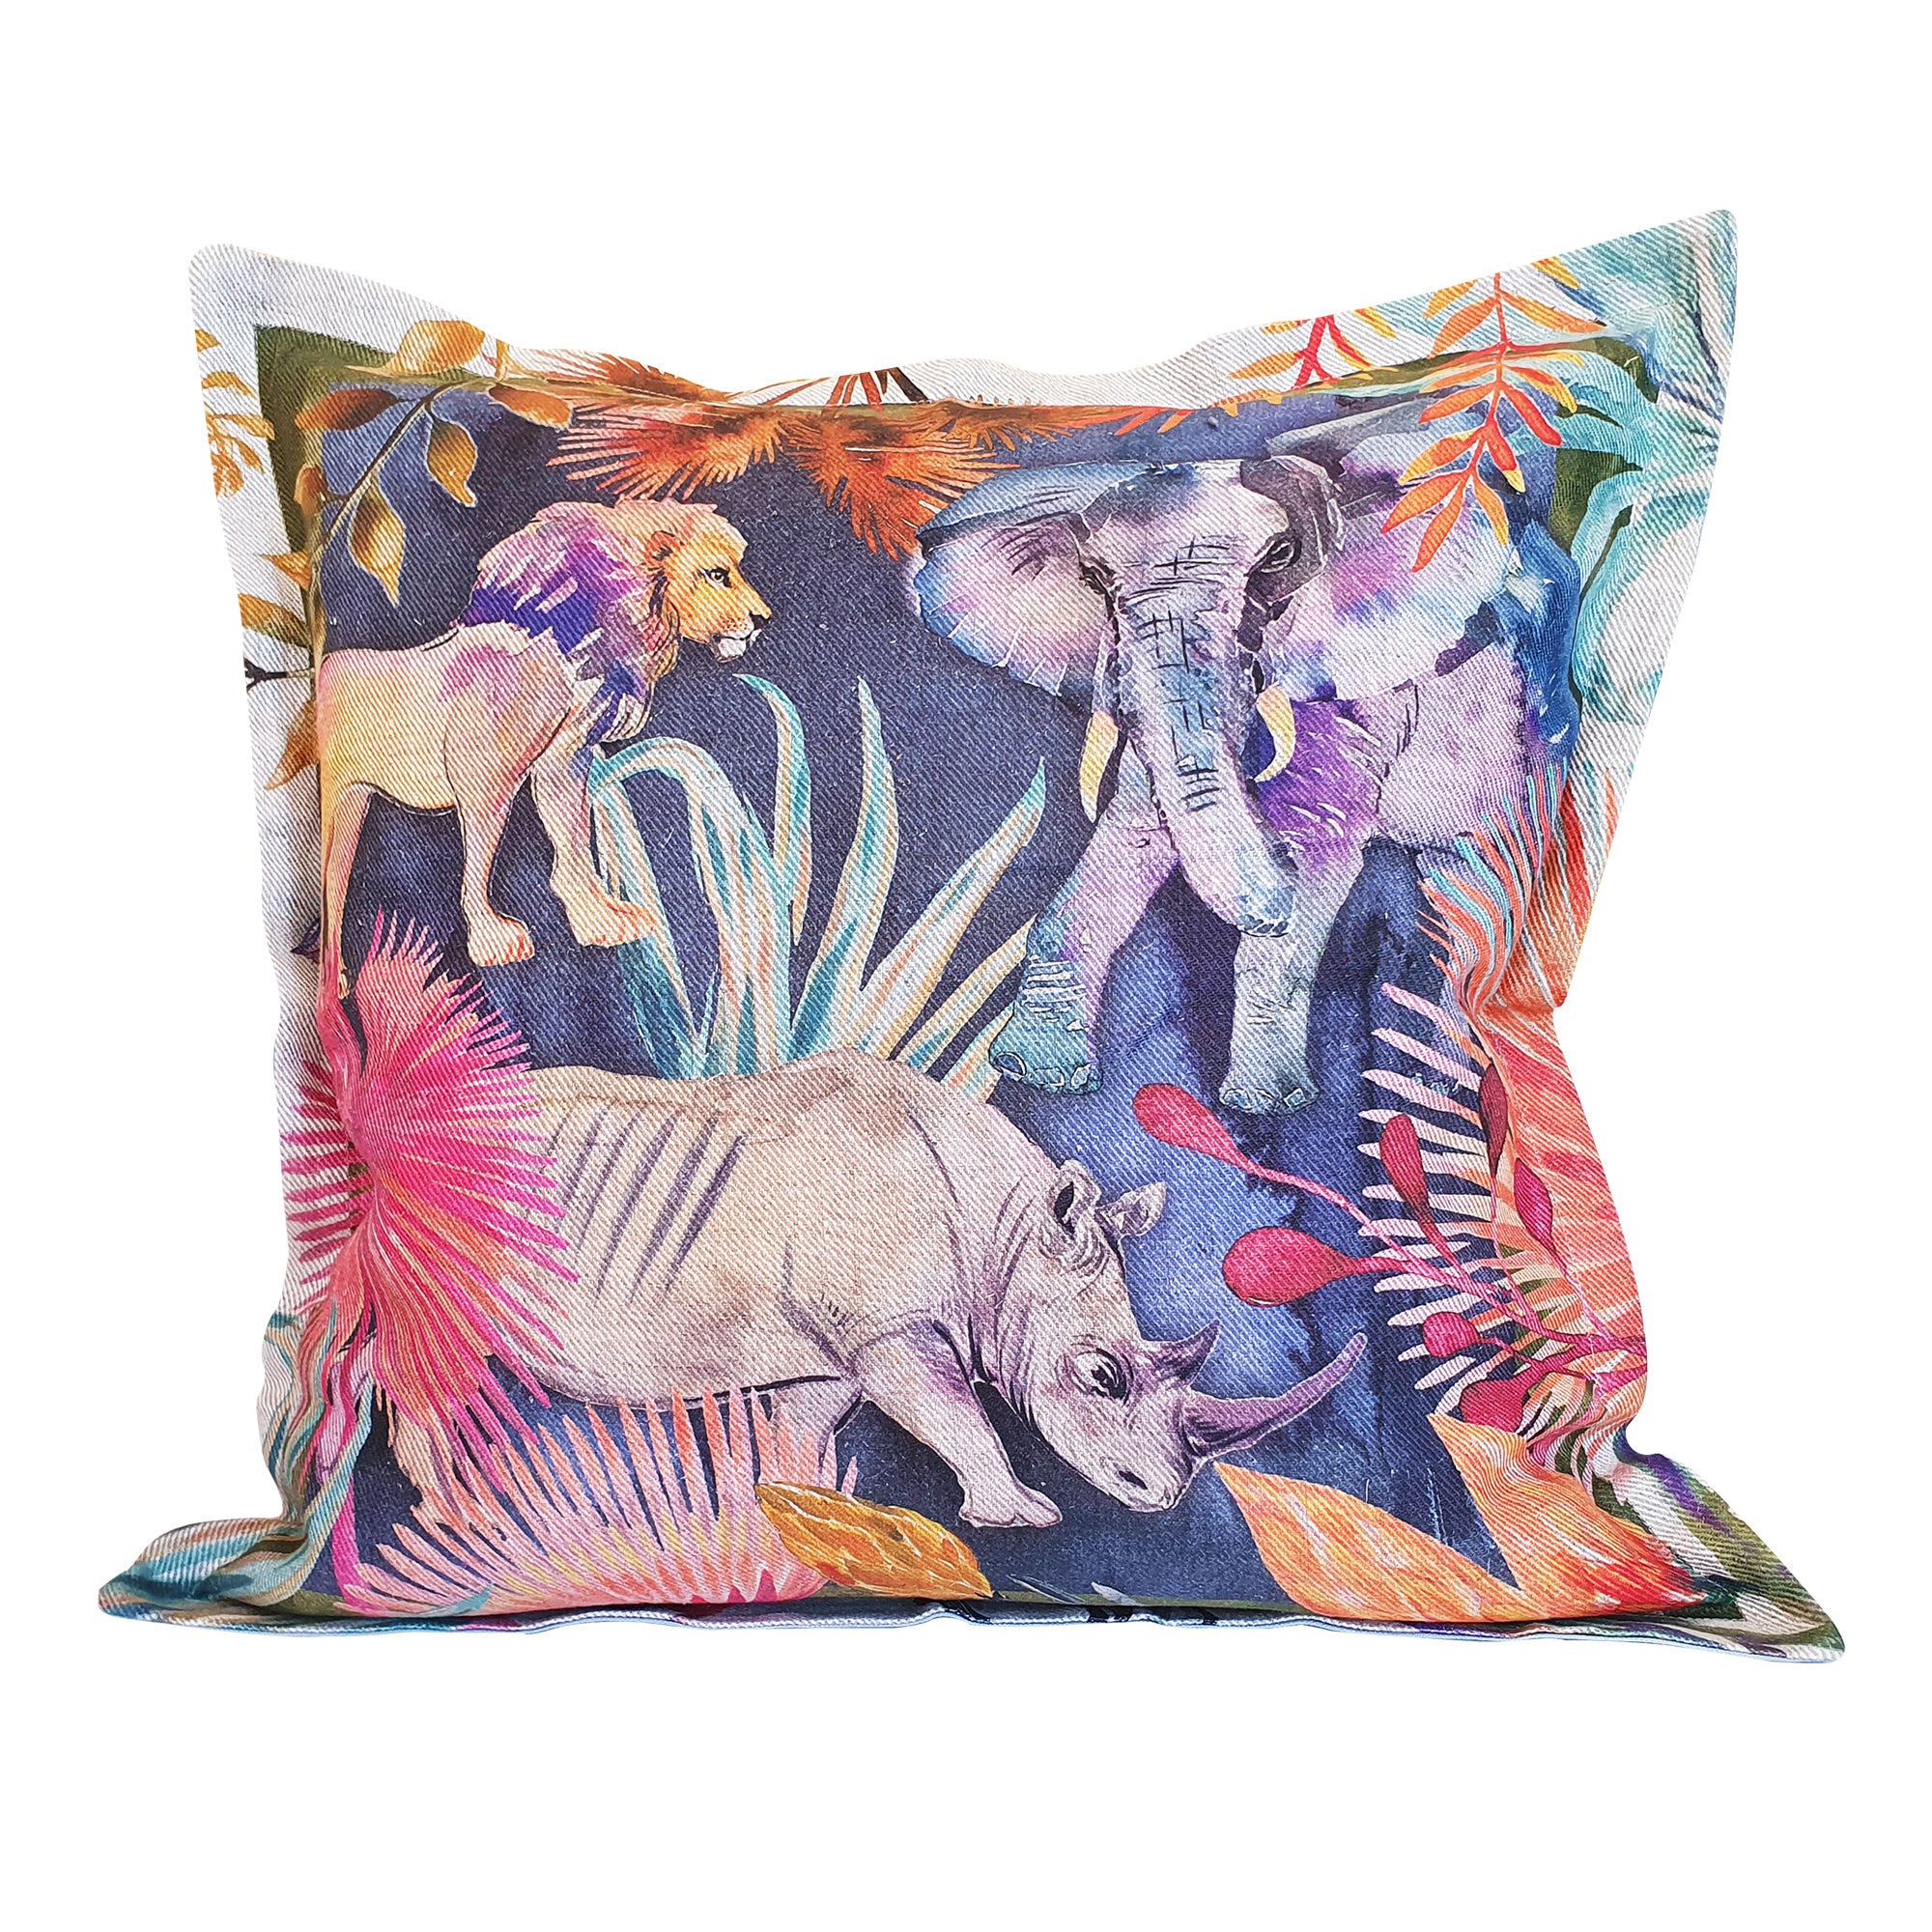 Wildlife with Elephant Cushion Cover, Standard, Belgian Linen